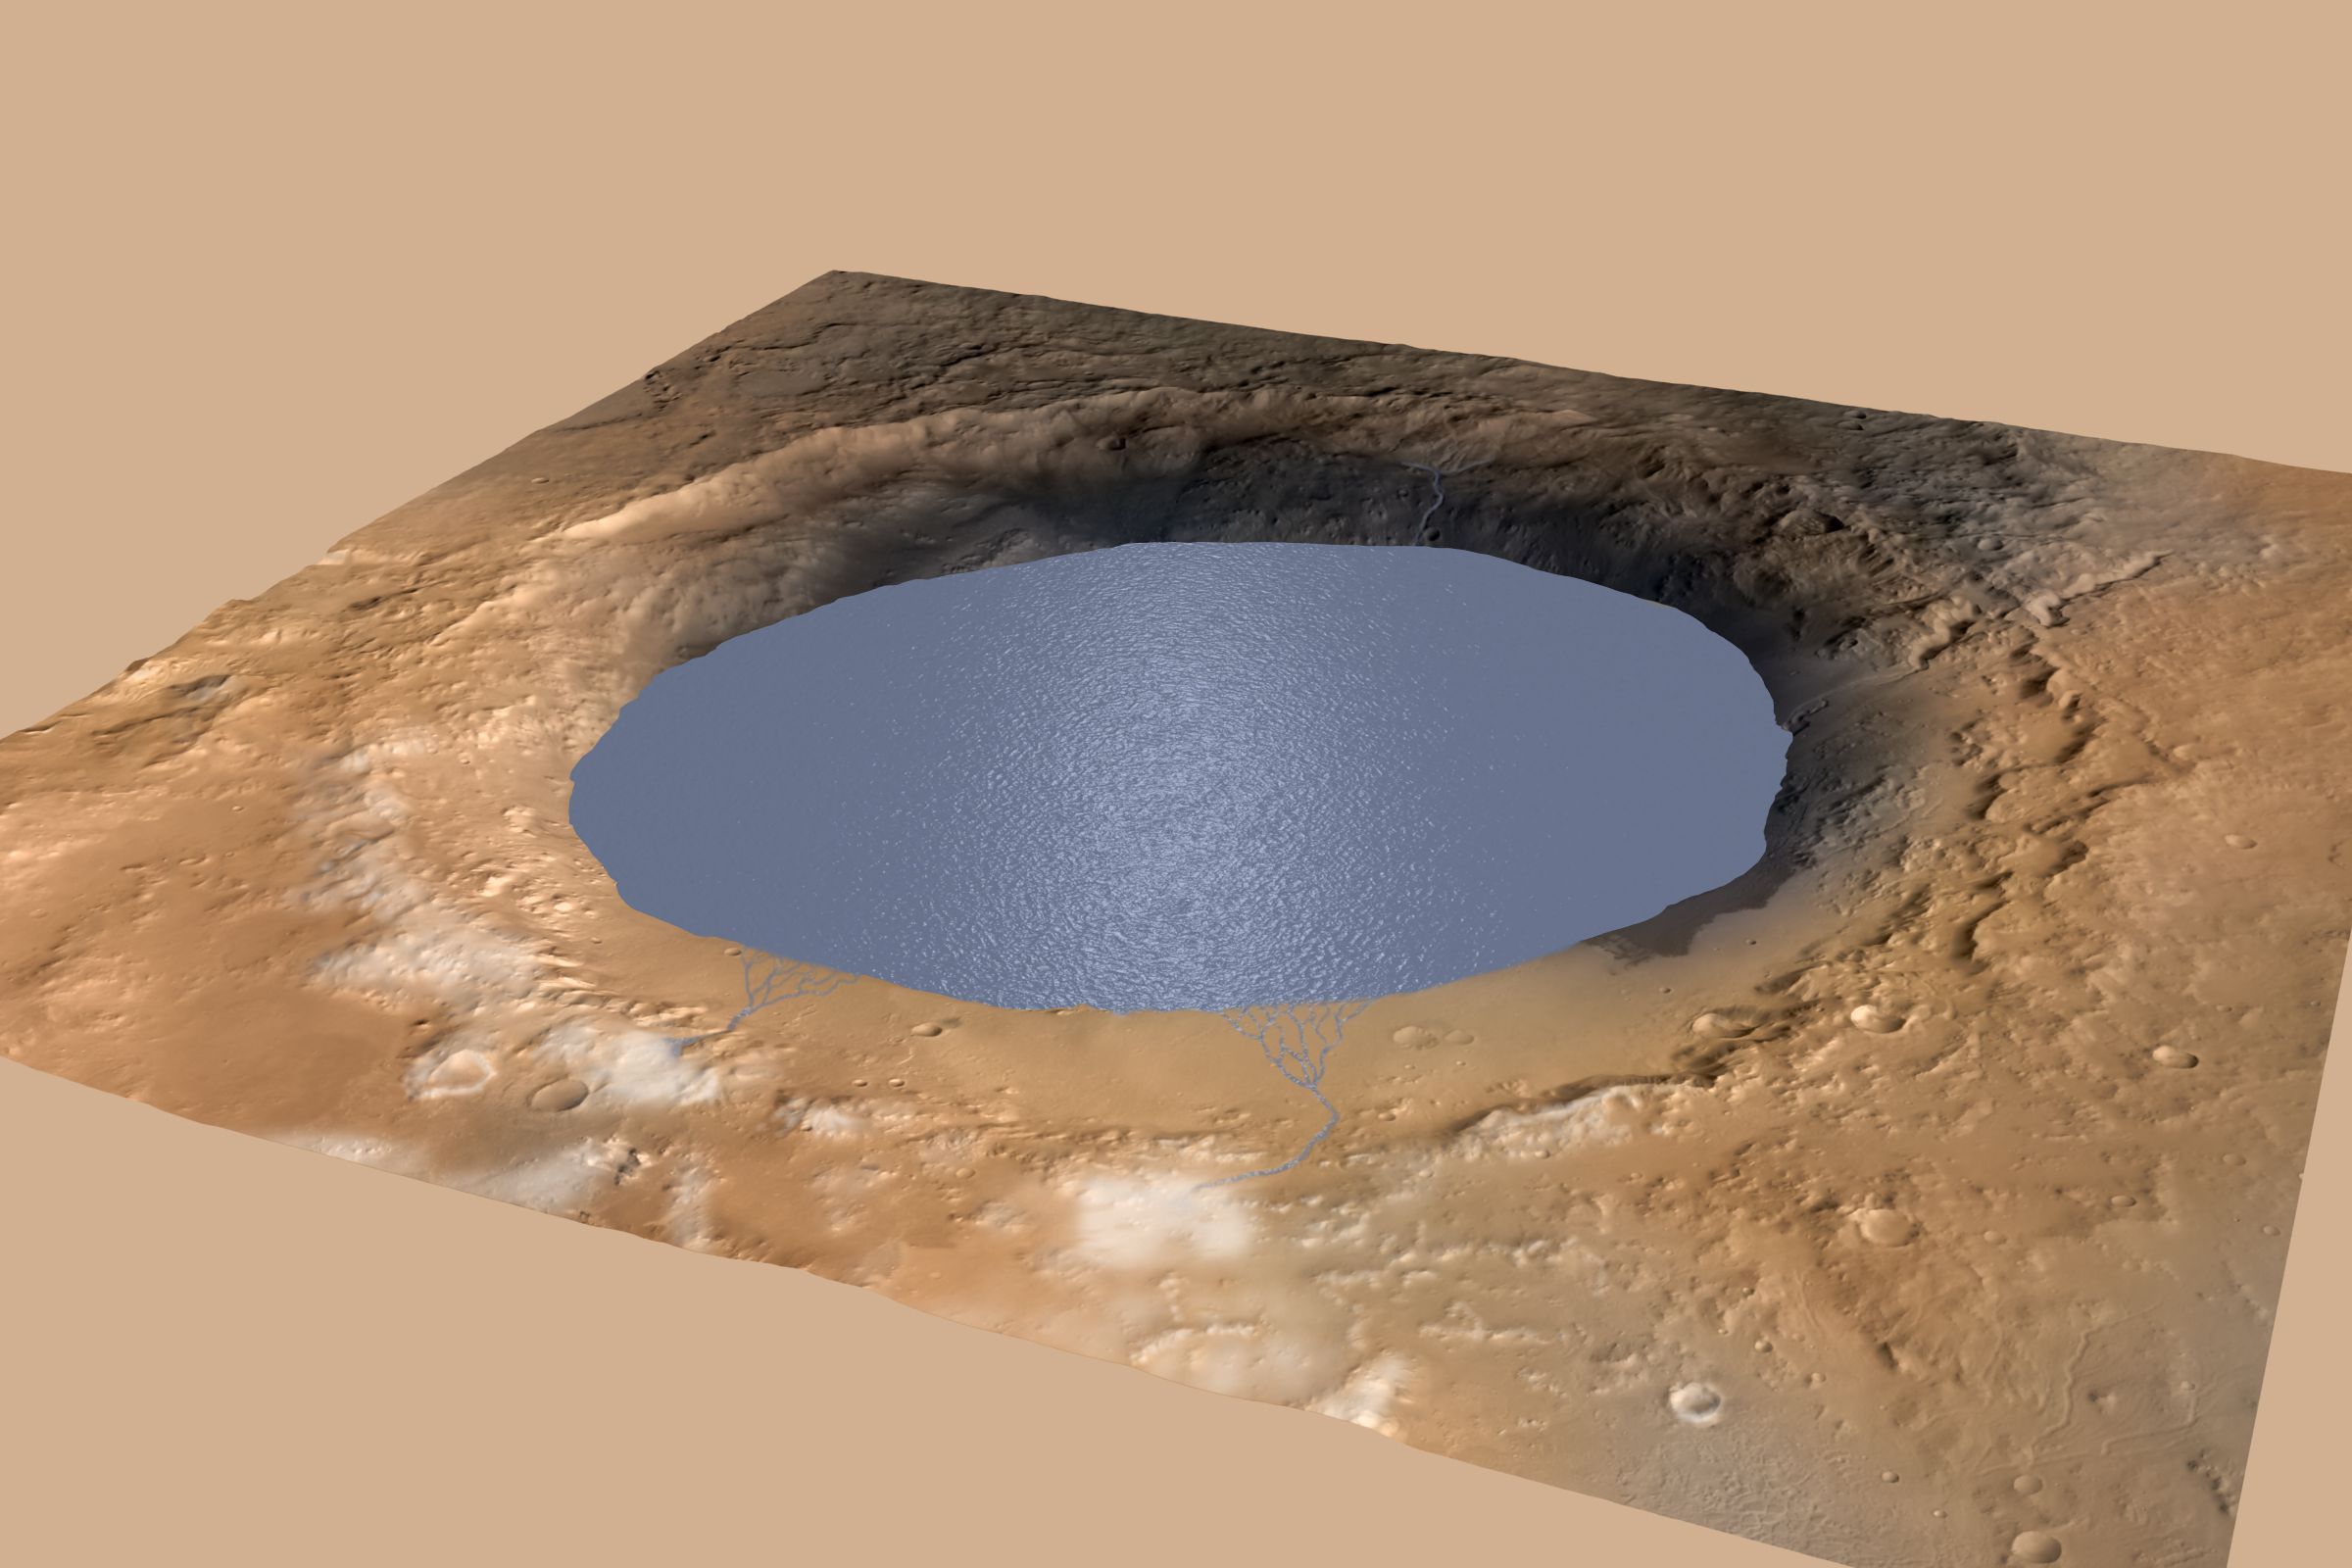 A rendering of the lake that used to be in Mars’ Gale Crater.